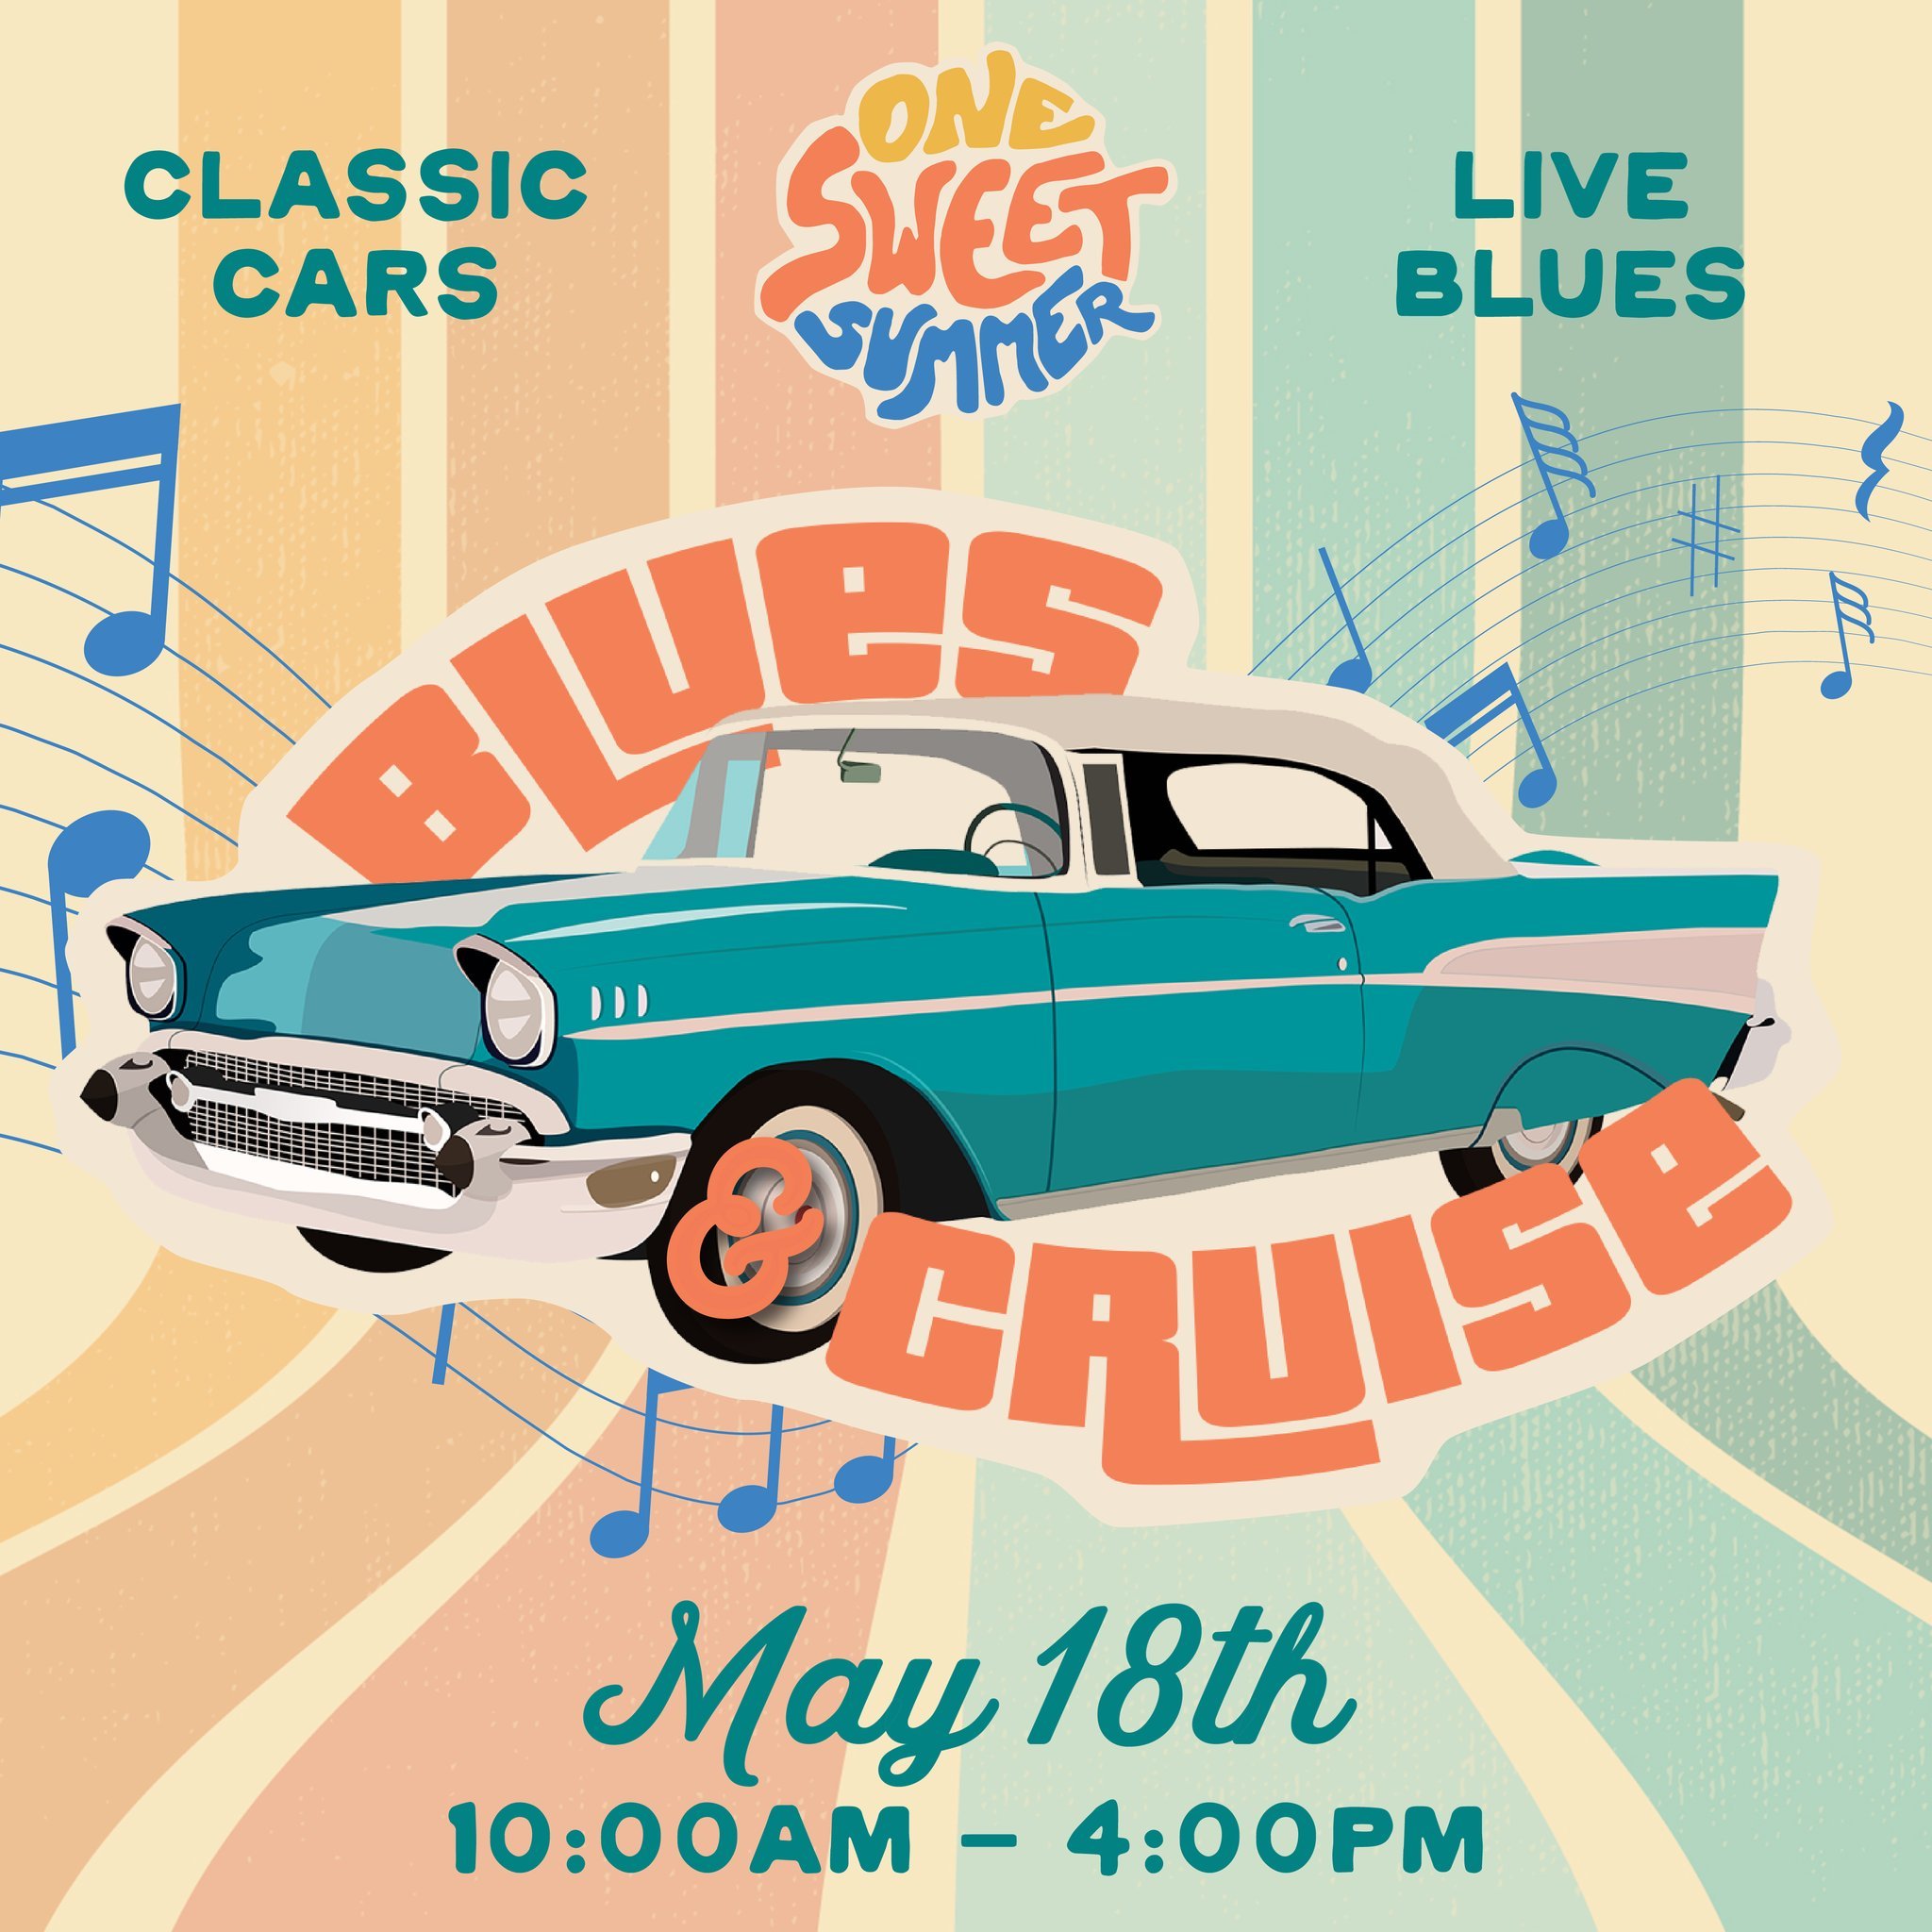 Get ready to groove and cruise at our Blues Music &amp; Classic Car Show. 
Event Details:
Saturday, May 18th | 10:00am &ndash; 4:00pm | Downtown Loveland

Blues music can be found in 2 locations Downtown:
The 5th Street Stage
12:00pm &ndash; 1:15pm |